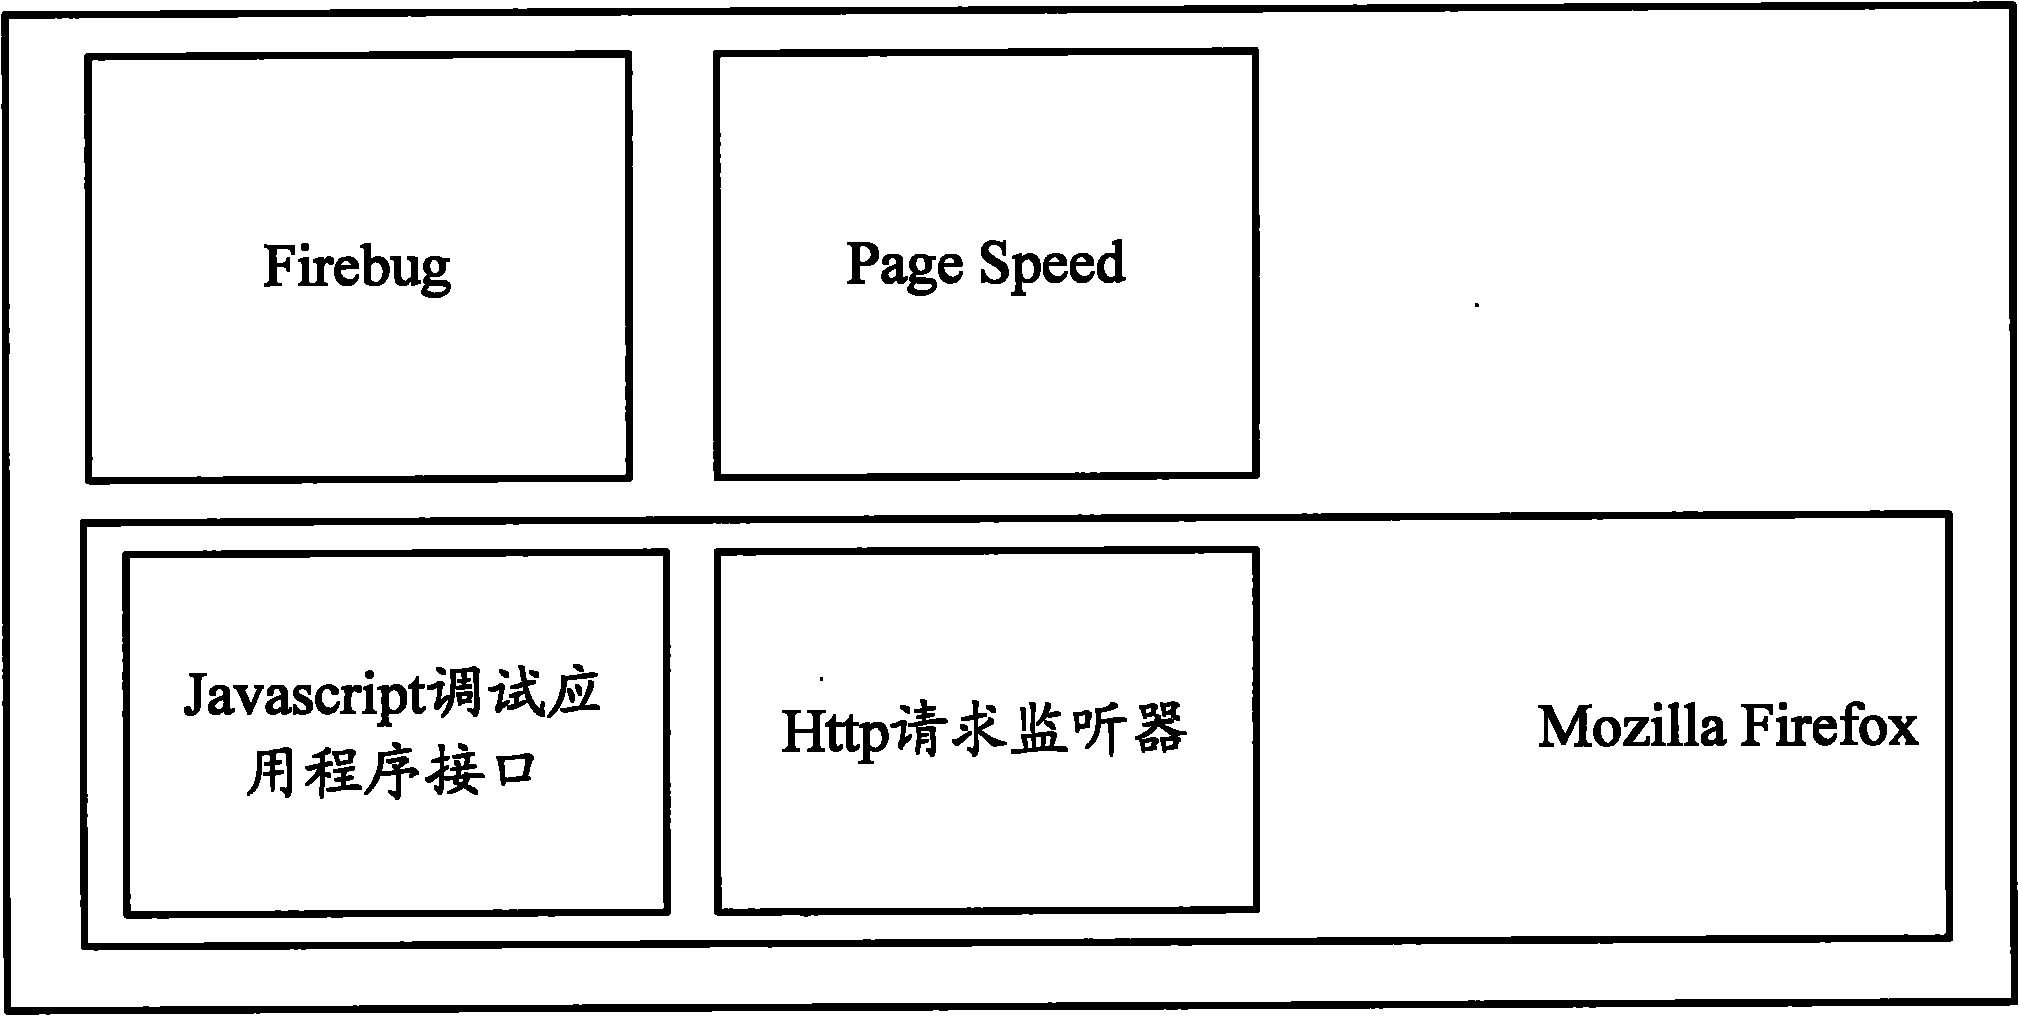 Web performance analysis system and method for realizing cross-browser in internet application system